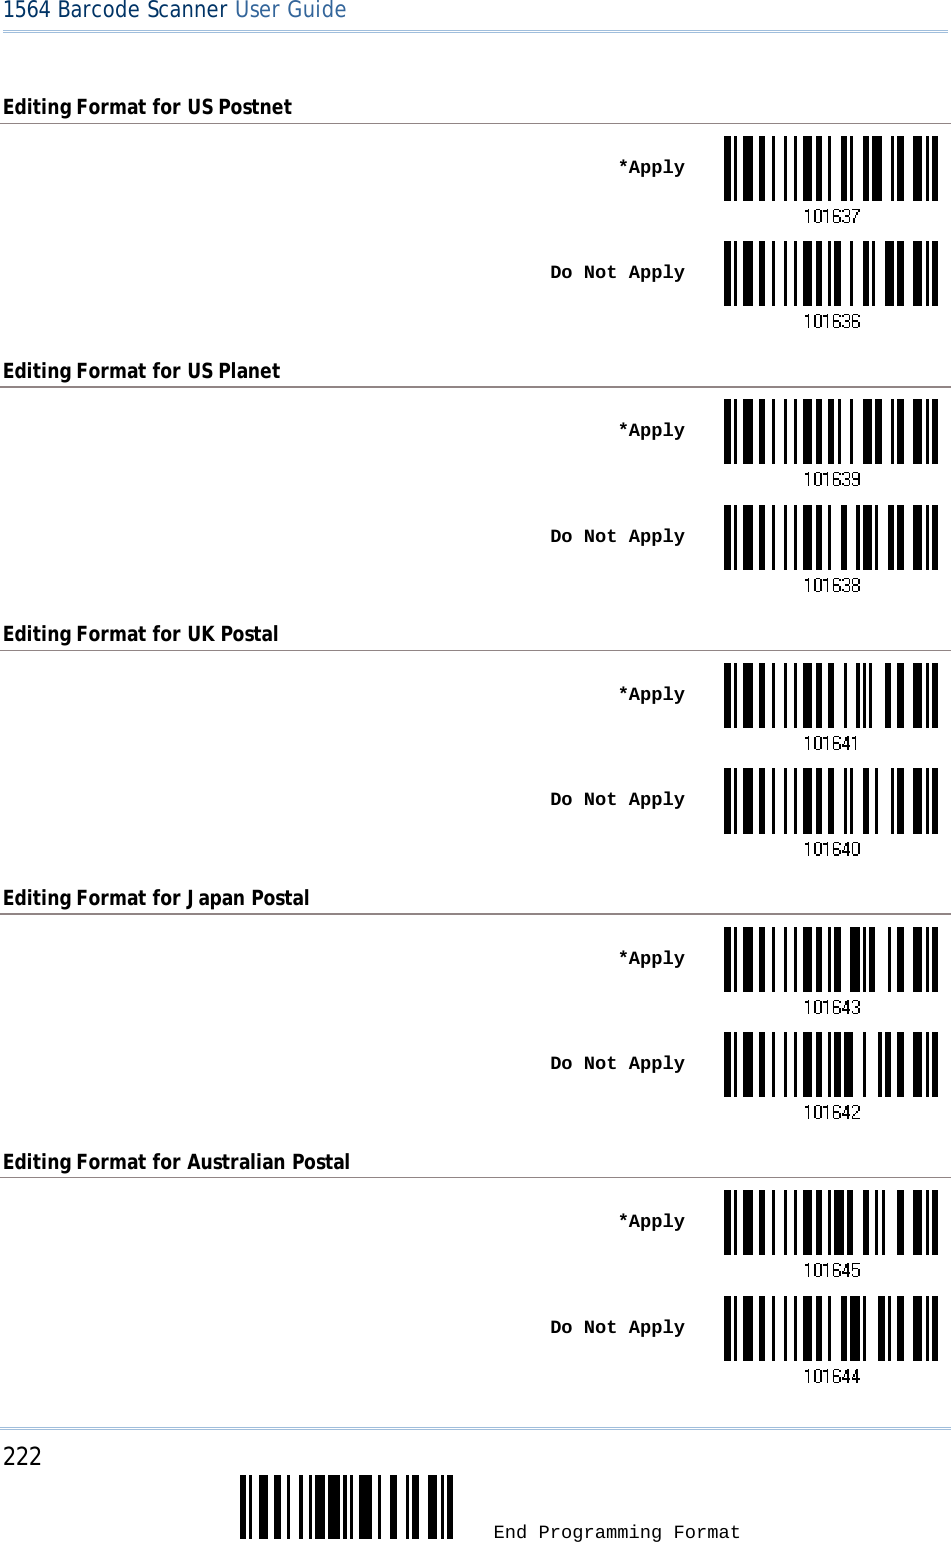 222  End Programming Format 1564 Barcode Scanner User Guide  Editing Format for US Postnet  *Apply Do Not ApplyEditing Format for US Planet  *Apply Do Not ApplyEditing Format for UK Postal  *Apply Do Not ApplyEditing Format for Japan Postal  *Apply Do Not ApplyEditing Format for Australian Postal  *Apply Do Not Apply